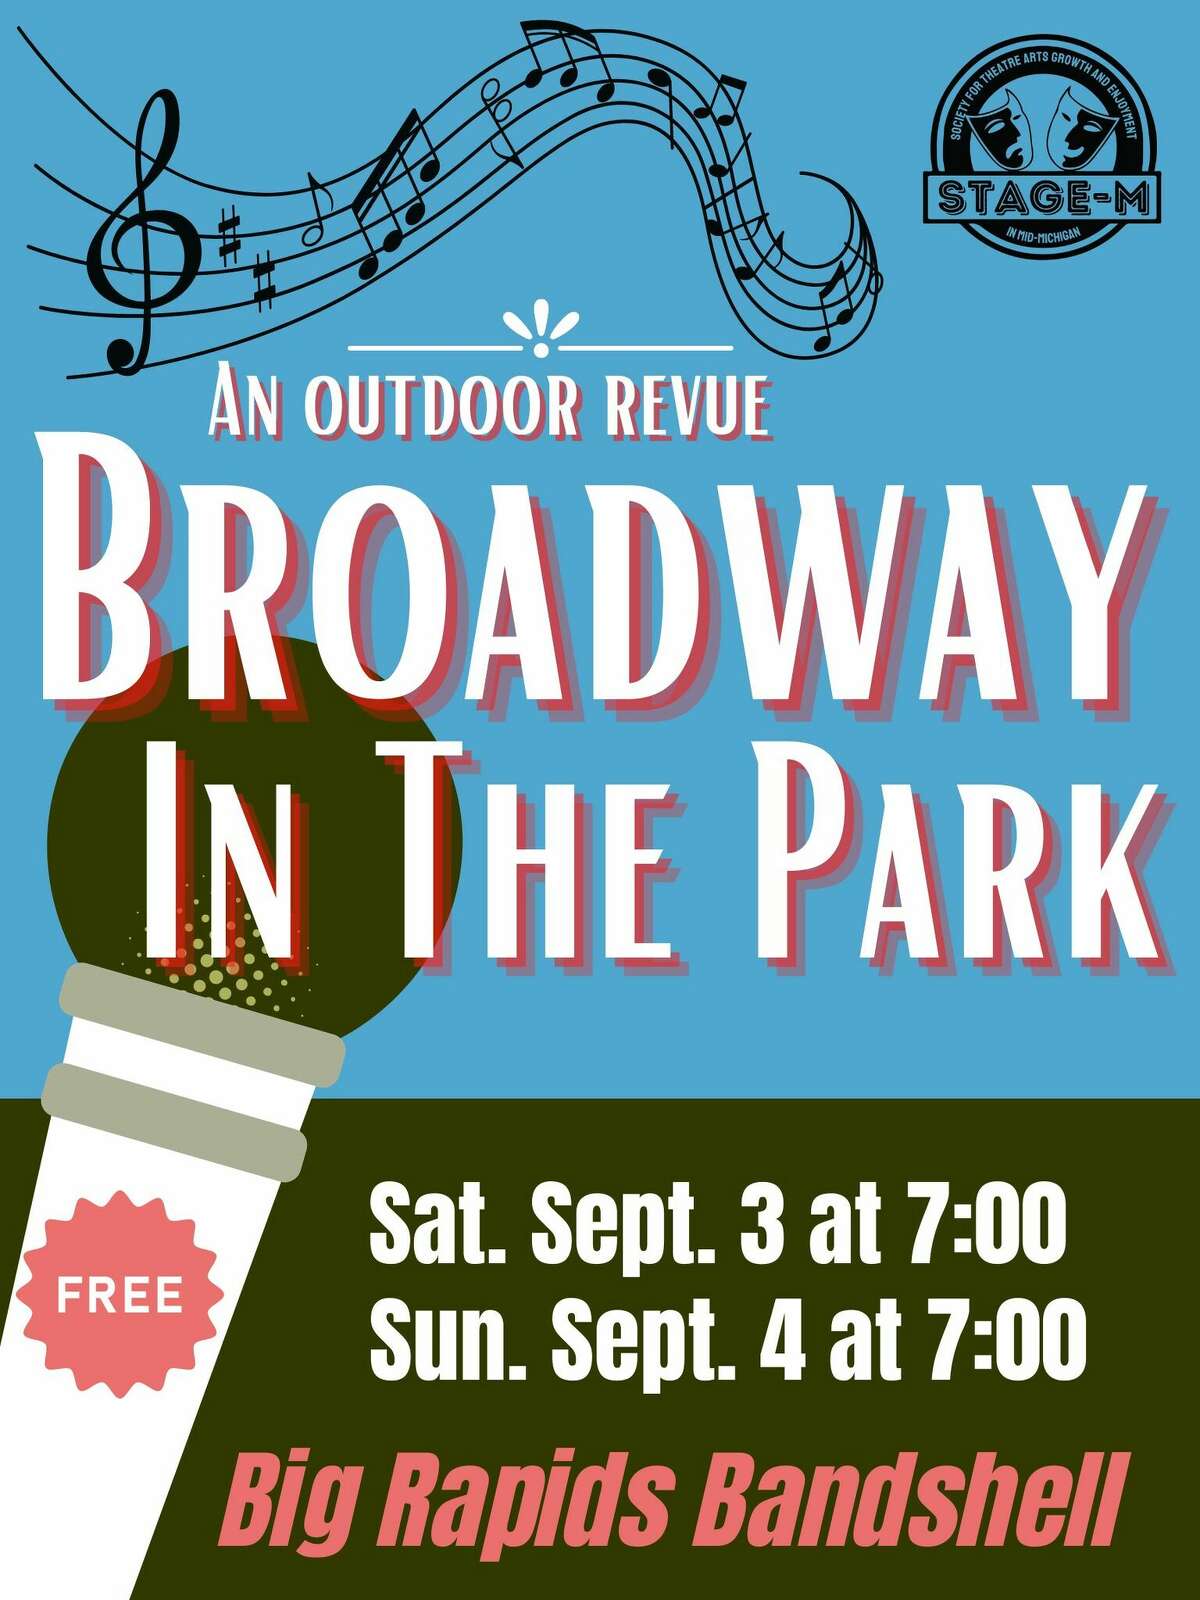 This year’s STAGE-M Broadway in the Park performances will mark the second annual installment of the event, which is held at the Big Rapids Bandshell. 